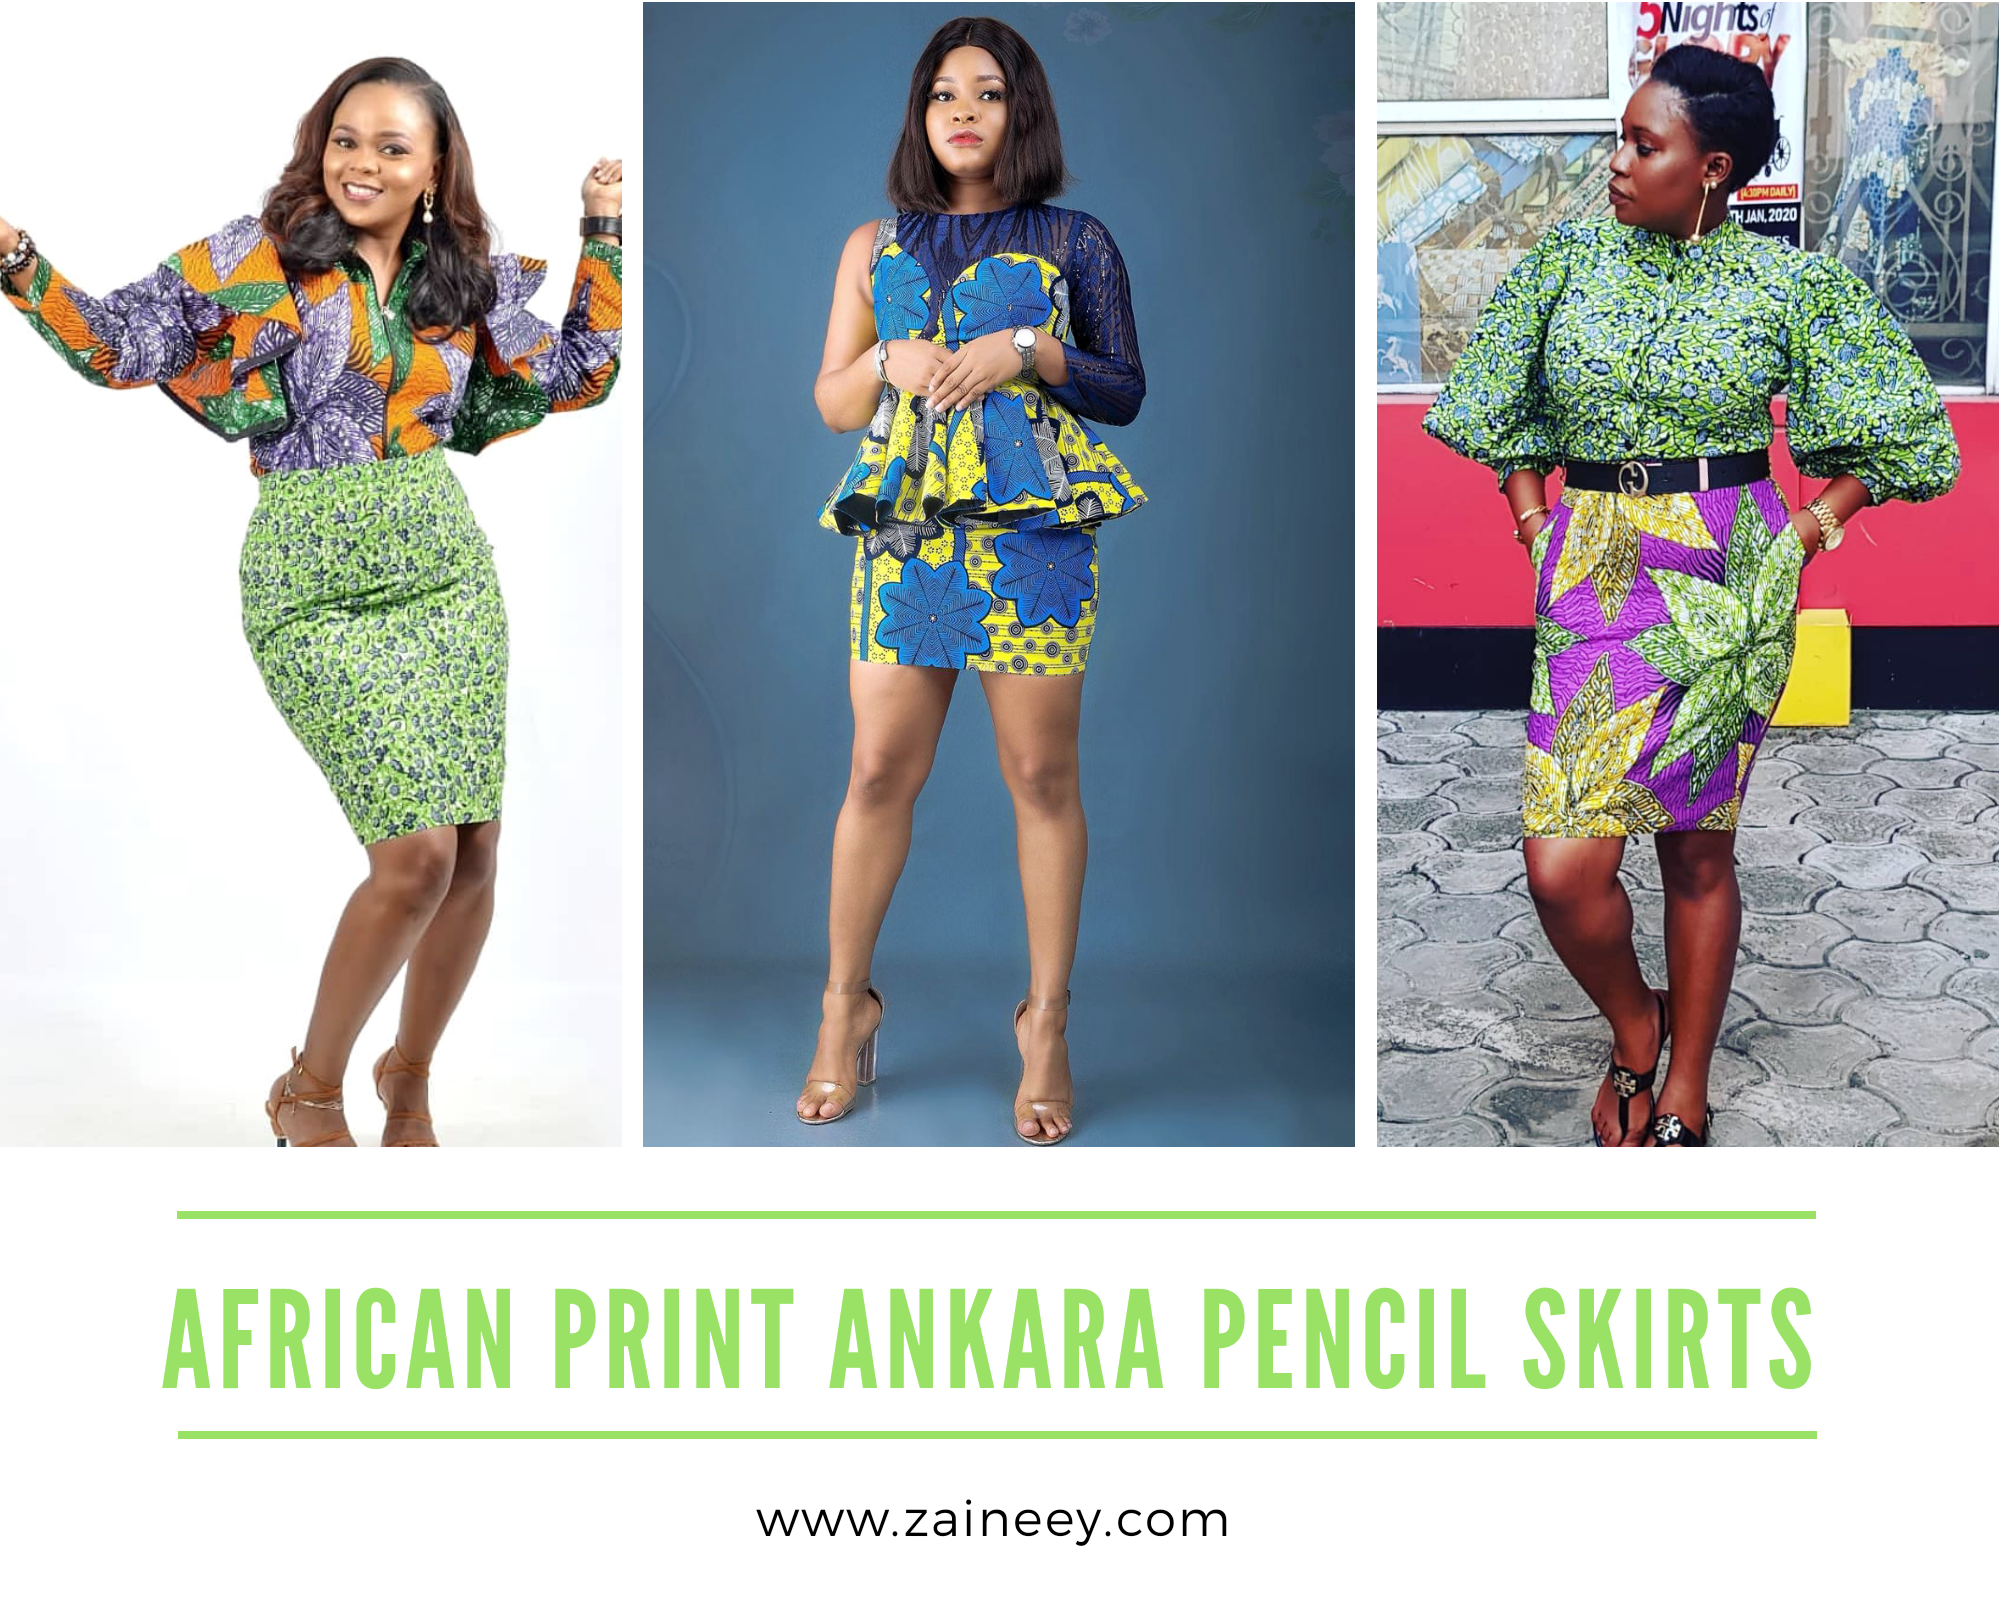 African print Ankara pencil skirts - Latest Styles for Ladies 